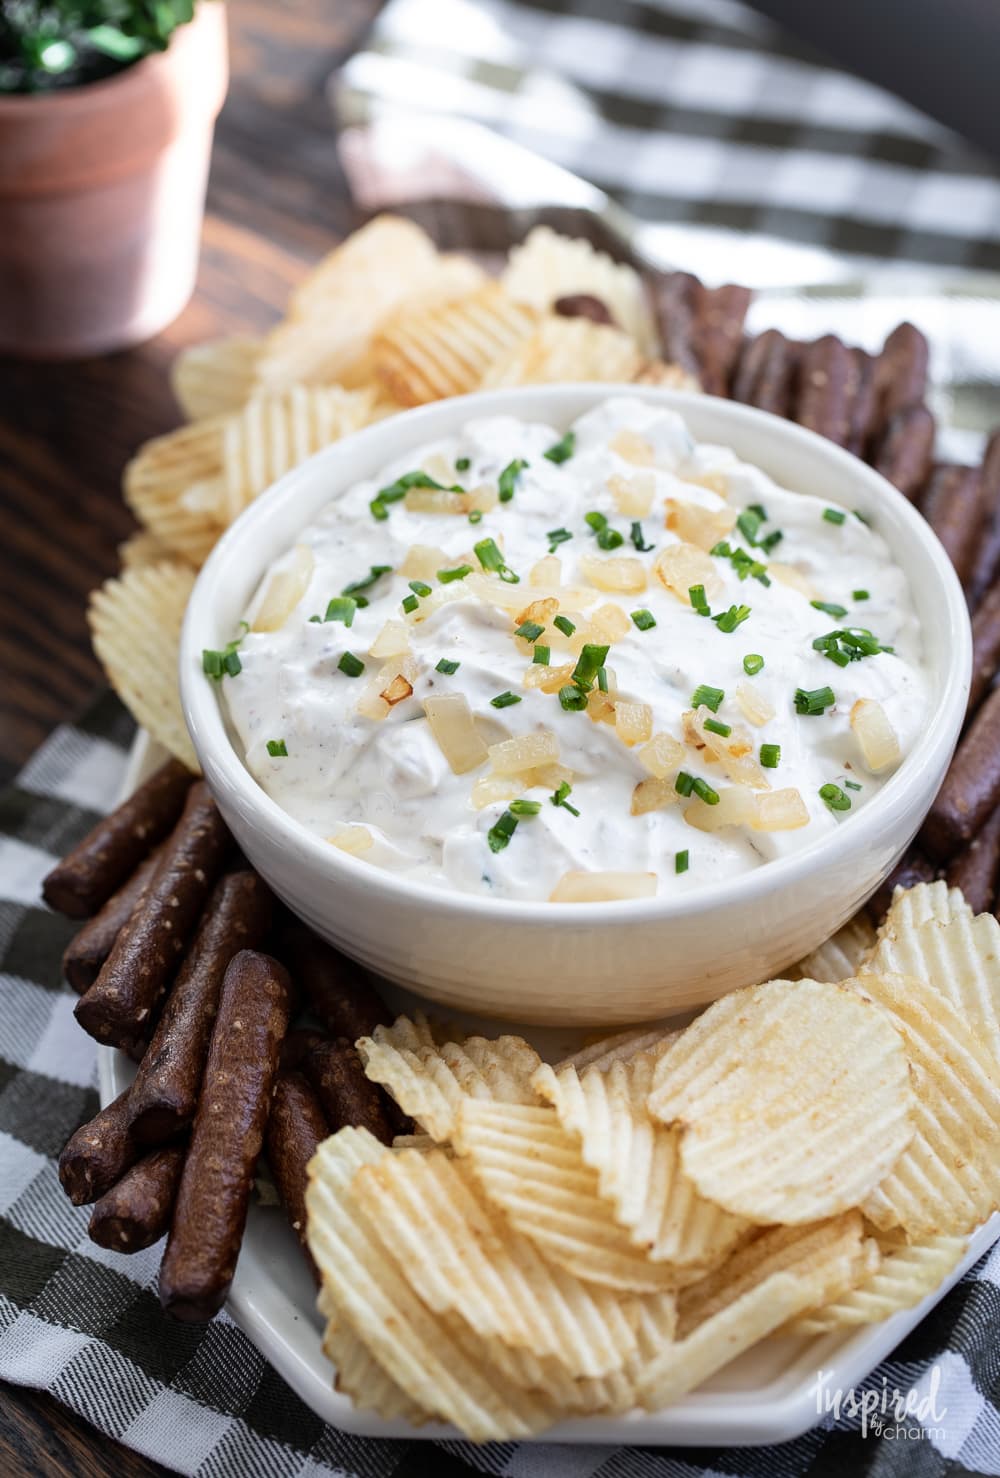 sour cream and onion dip in a bowl with potato chips and pretzels.